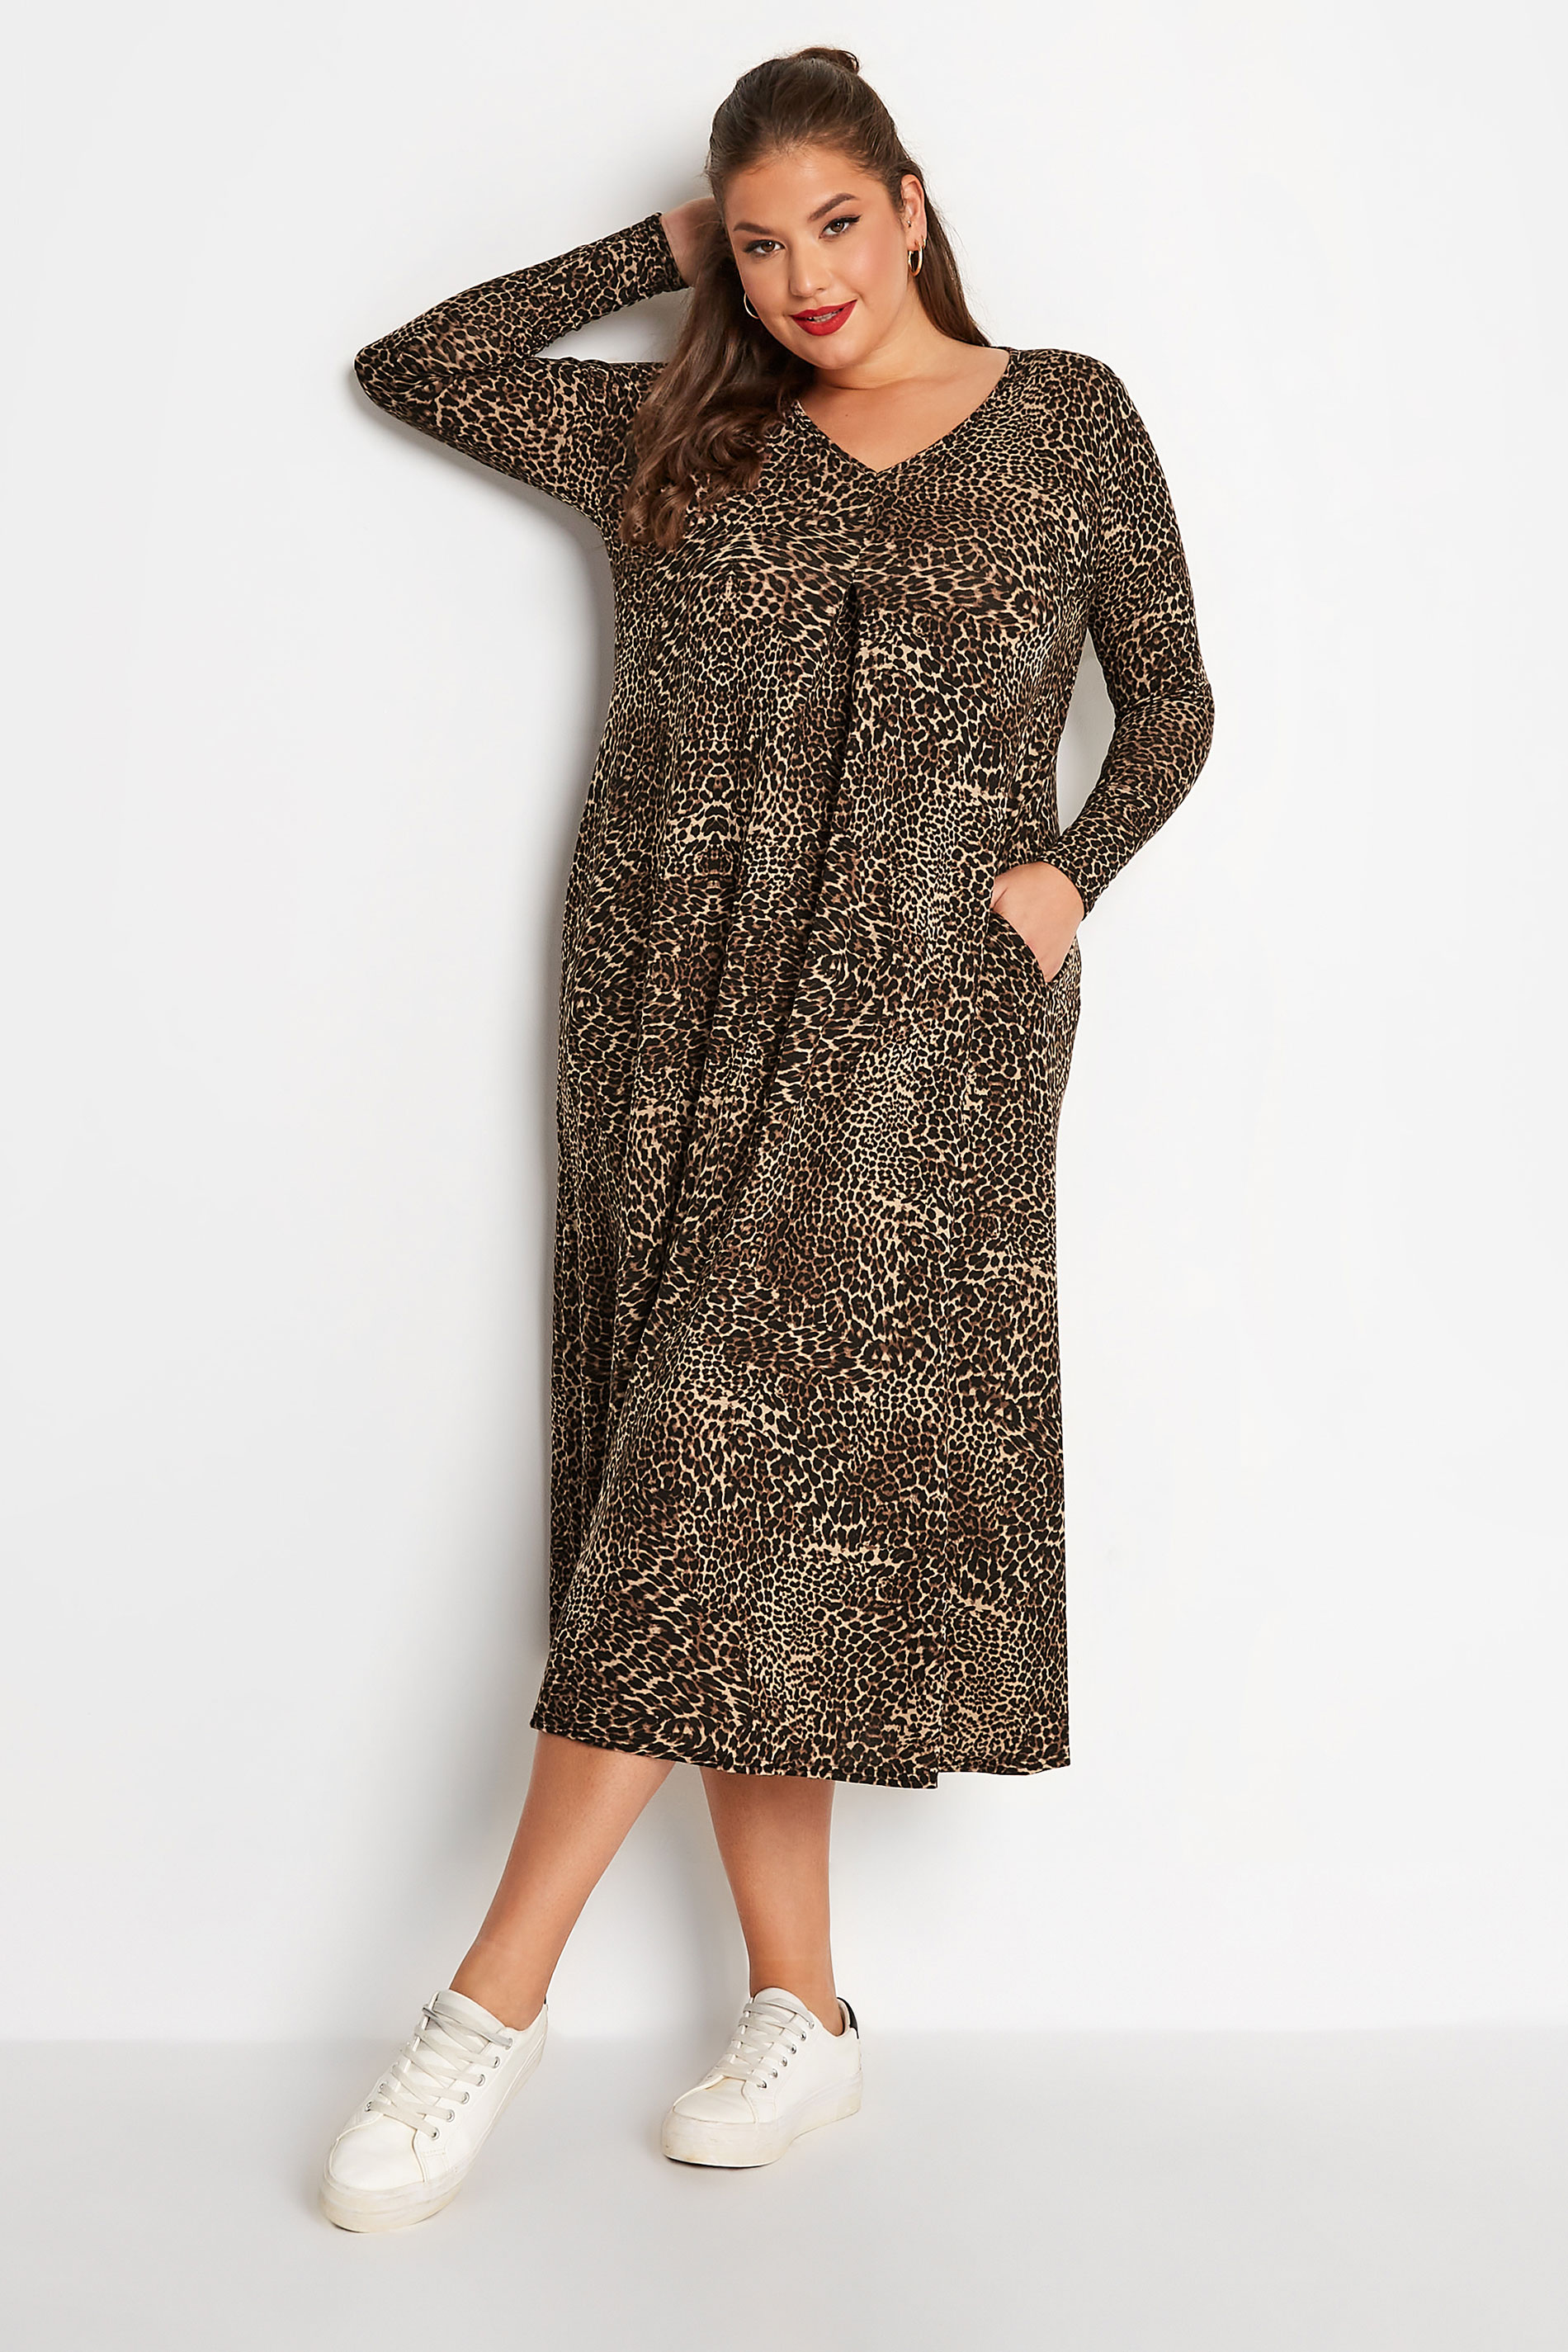 LIMITED COLLECTION Plus Size Brown Animal Print Pleat Front Dress | Yours Clothing 2